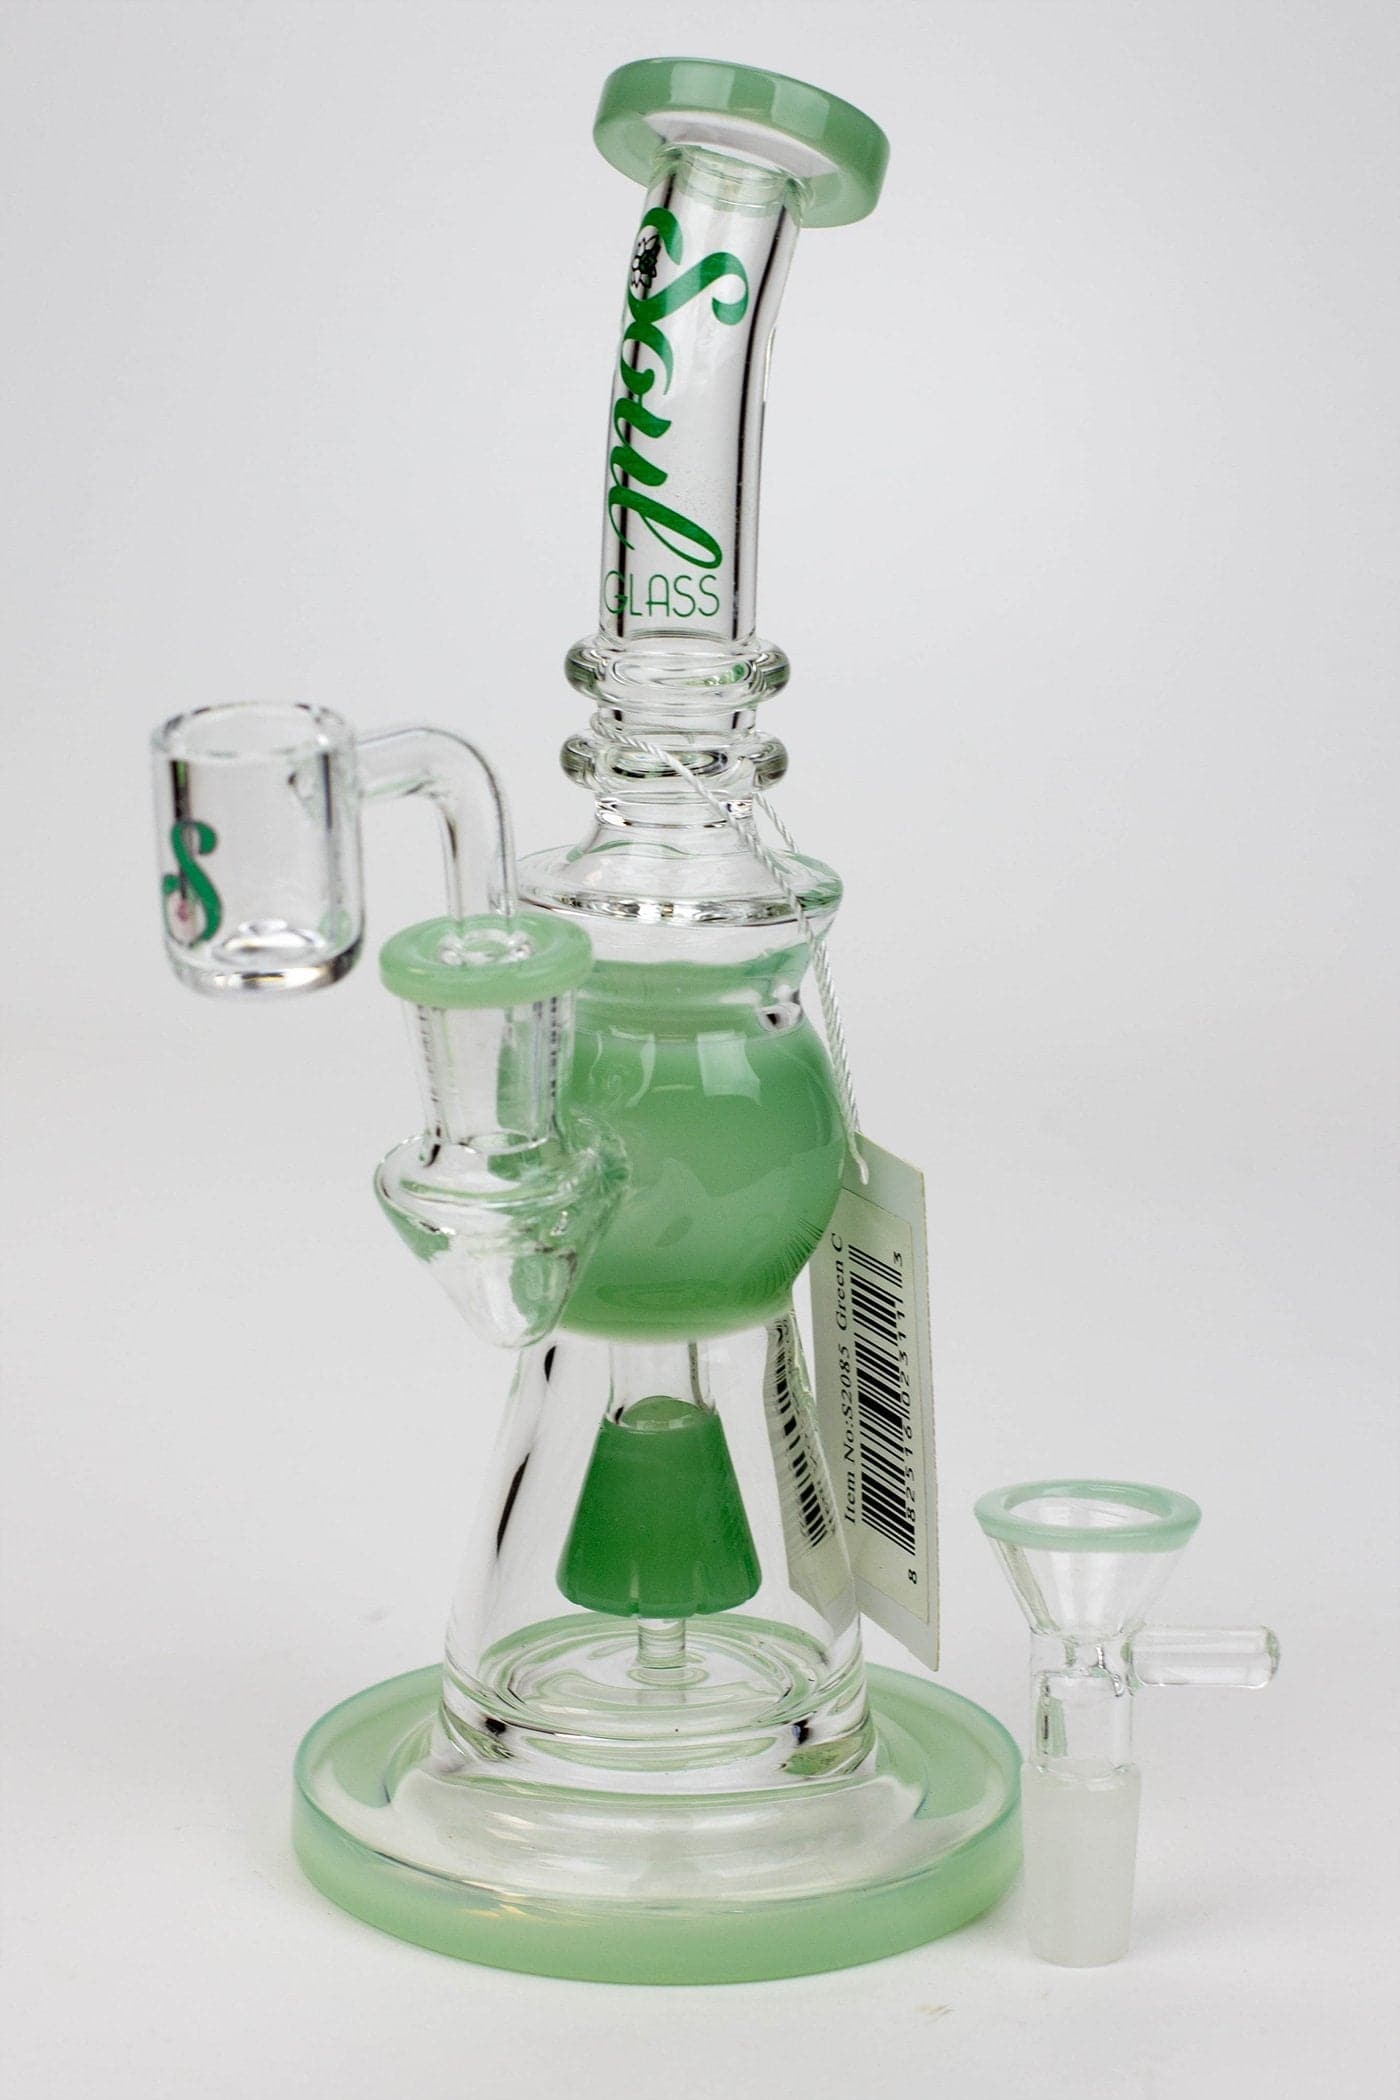 Soul glass 2-in-1 cone diffuser glass water pipes_9